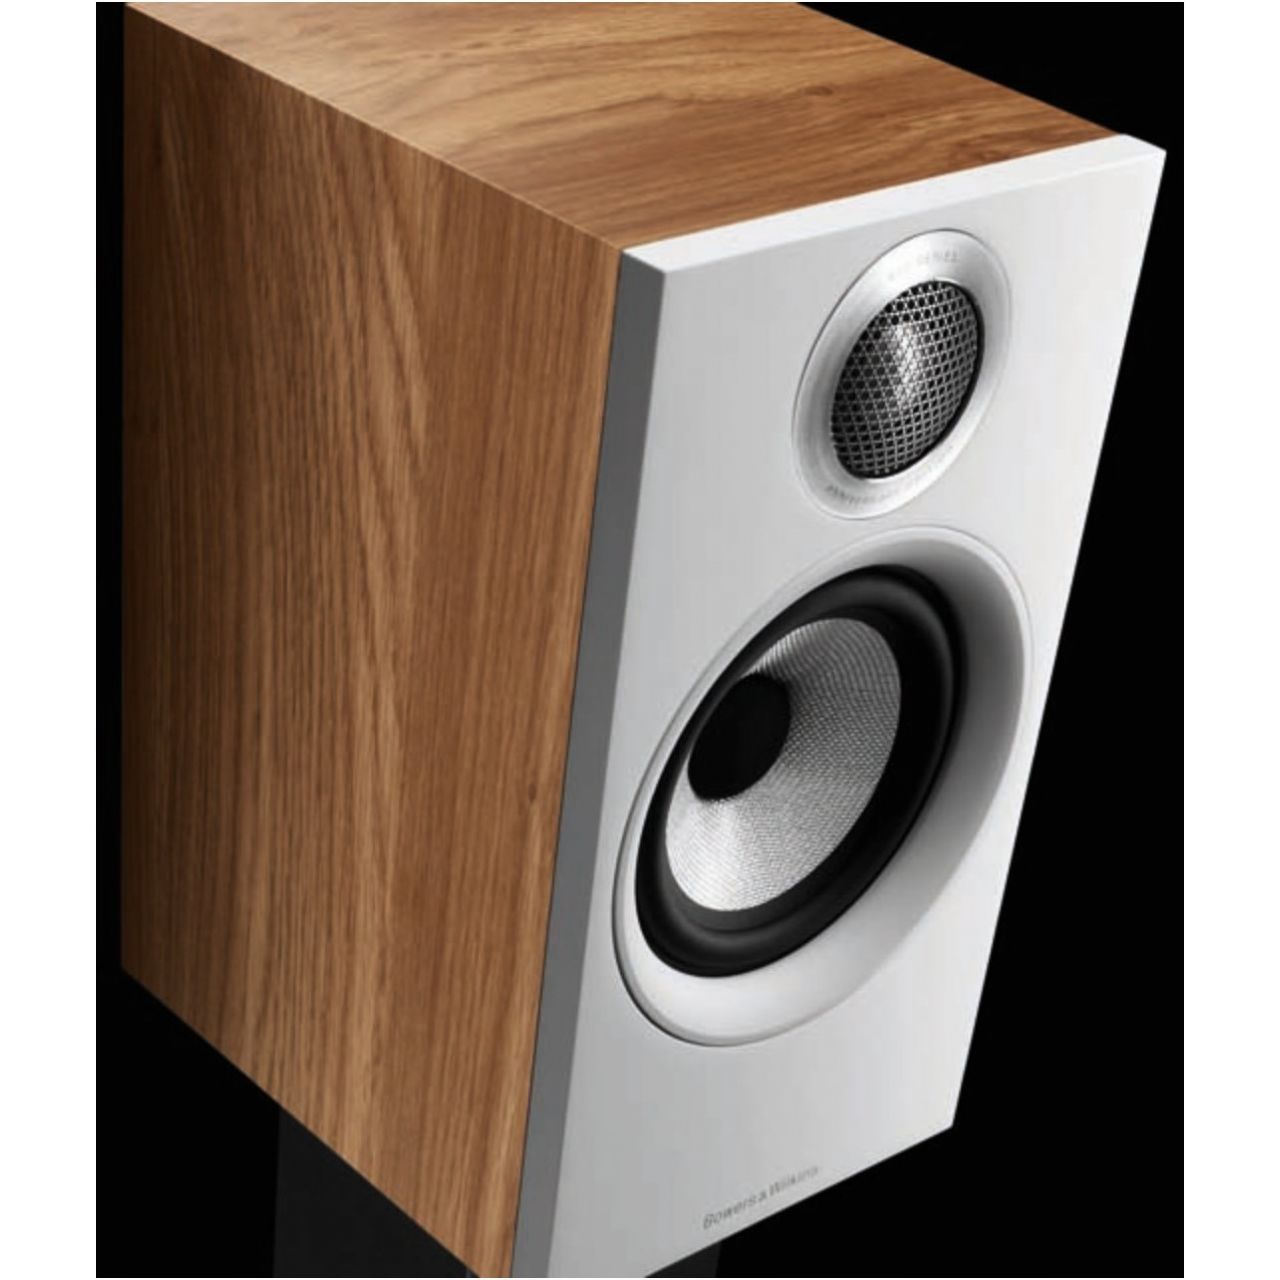 Bowers & Wilkins 607 S2 Anniversary Edition